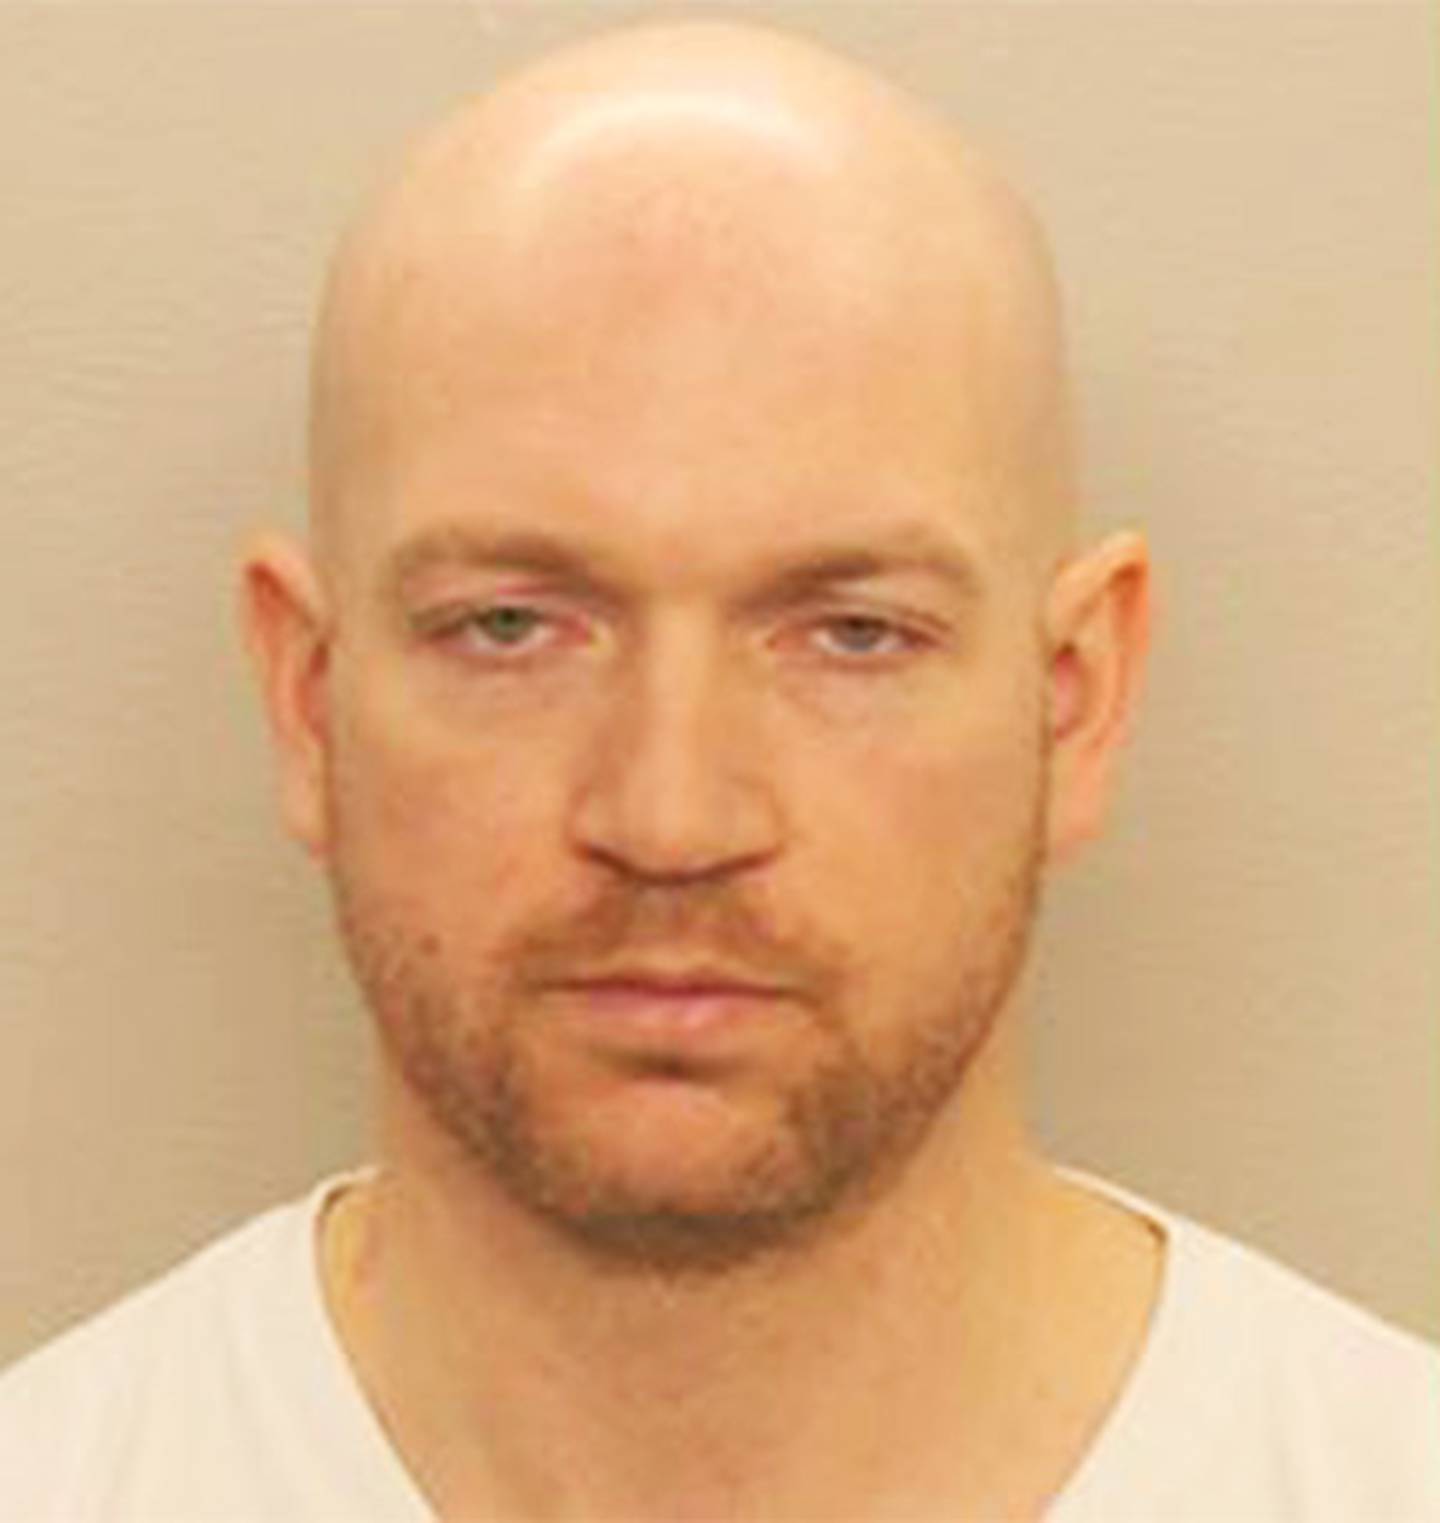 Matthew T. Plote, 34, of Malta, Illinois has been charged for the murder of Melissa Lamesch, 27, of Mt. Morris, Illinois and her unborn child in November 2020.